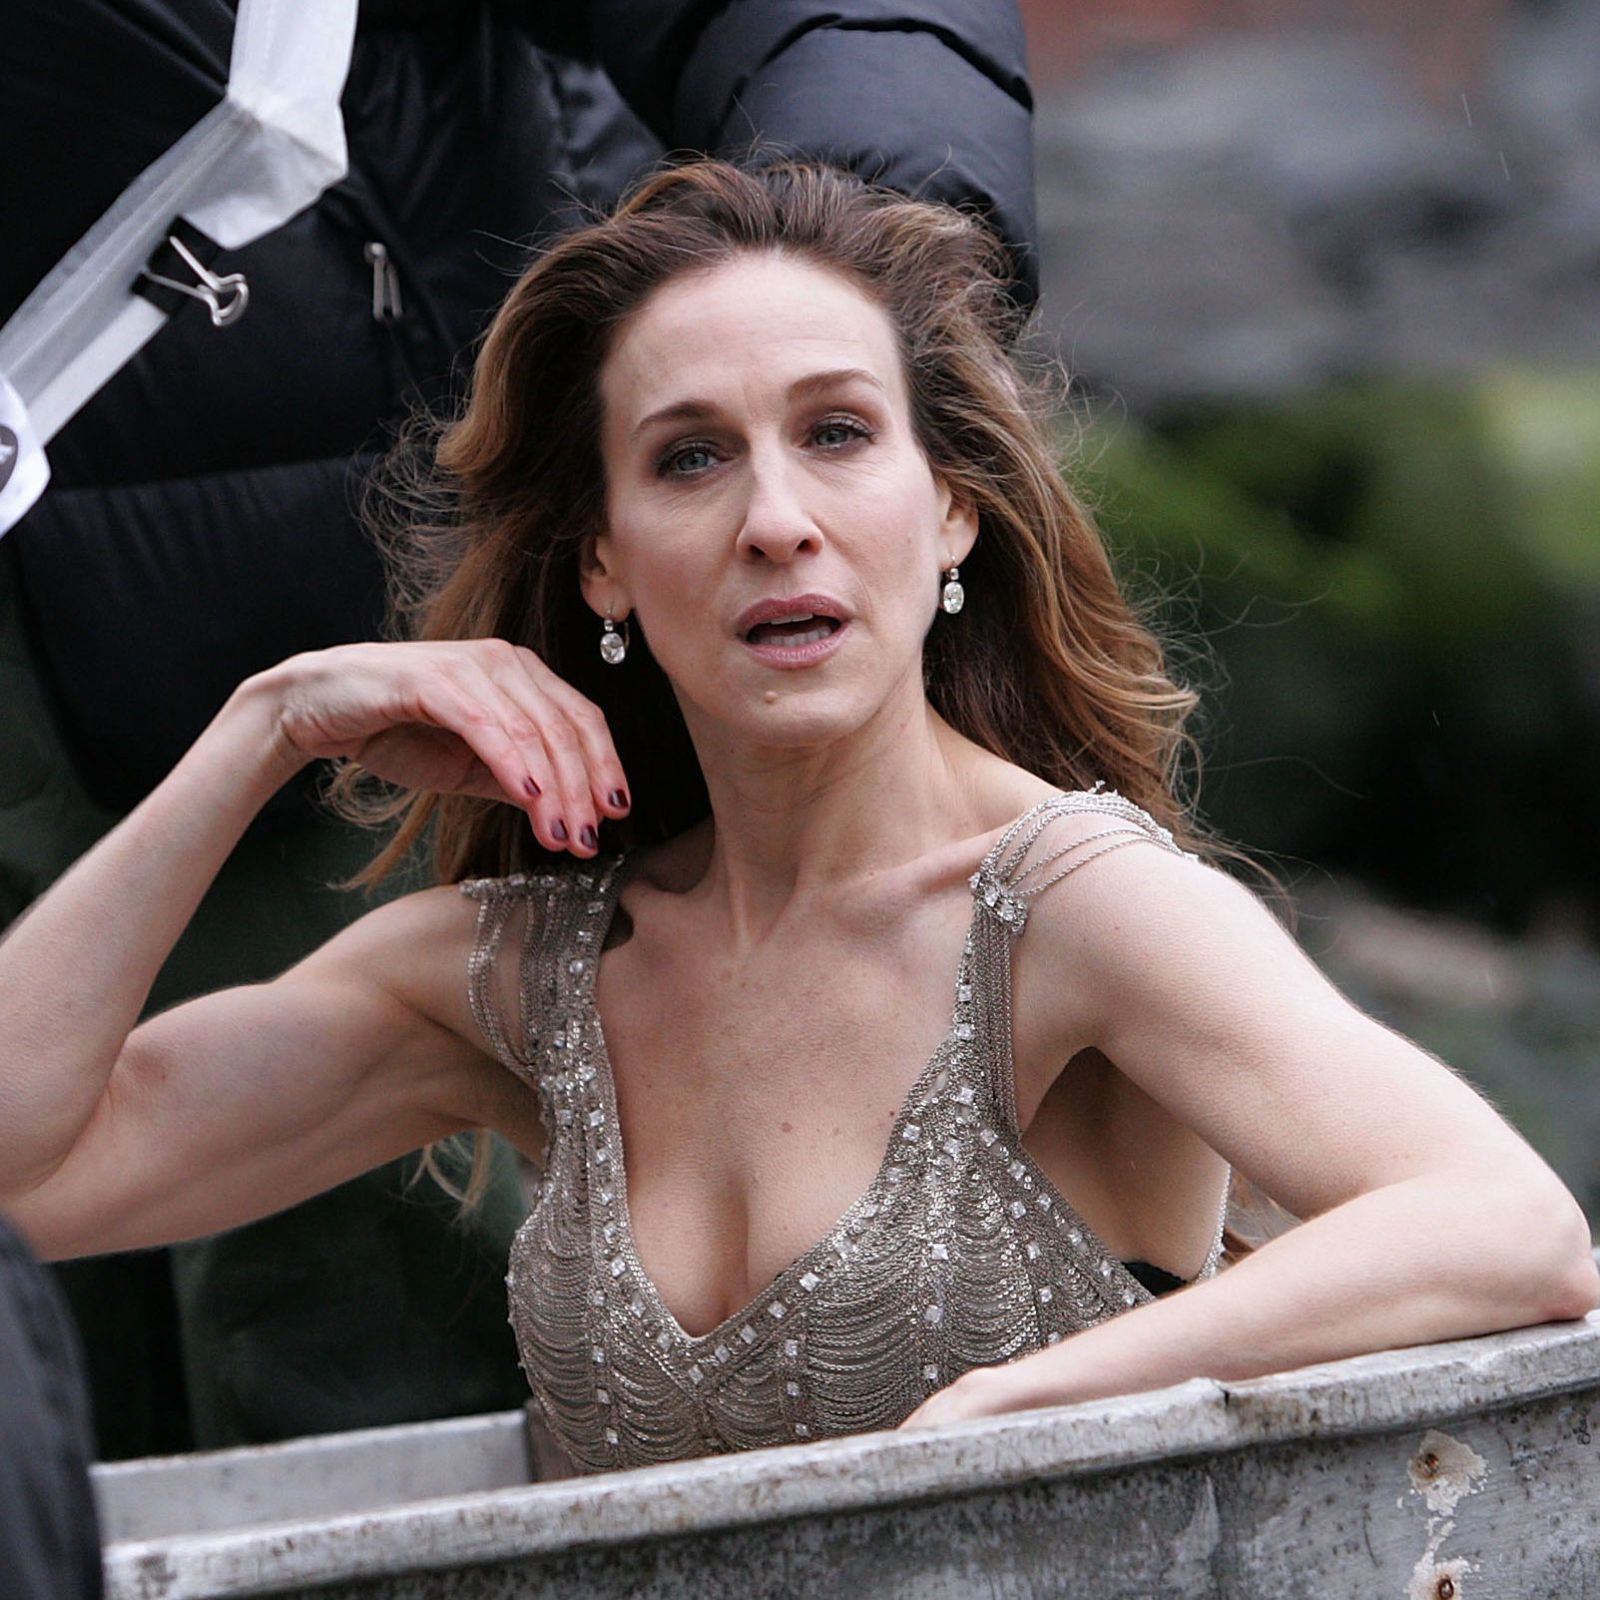 Sarah Jessica Parker Details How She Wept As Producers Tried To Get Her To Film Nude photo